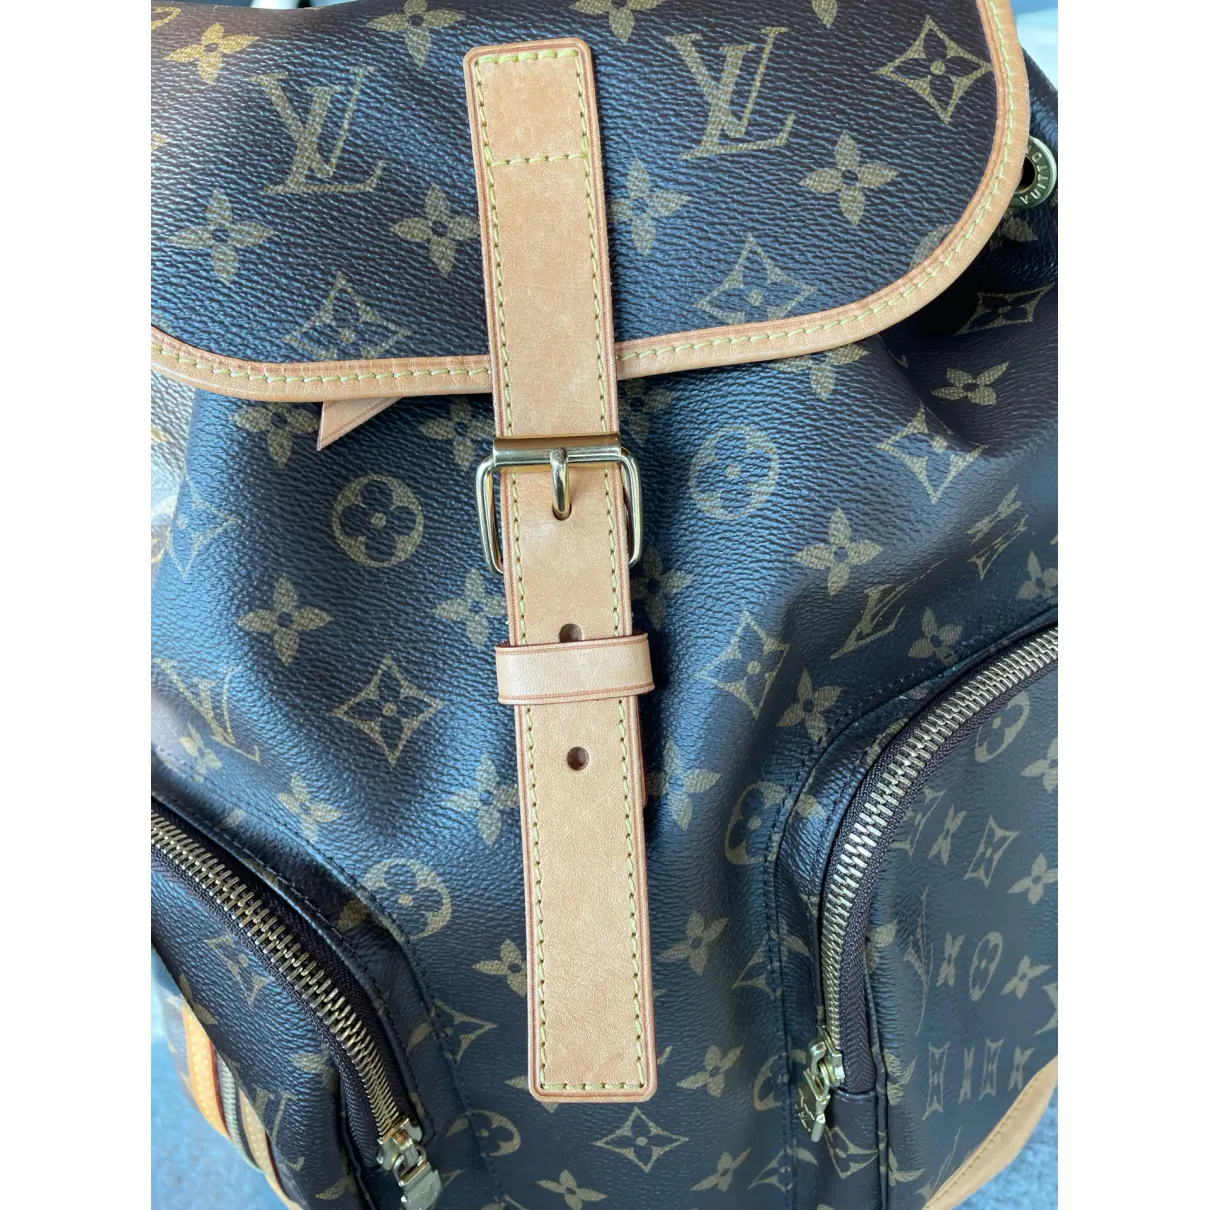 Bosphore Backpack cloth backpack Louis Vuitton